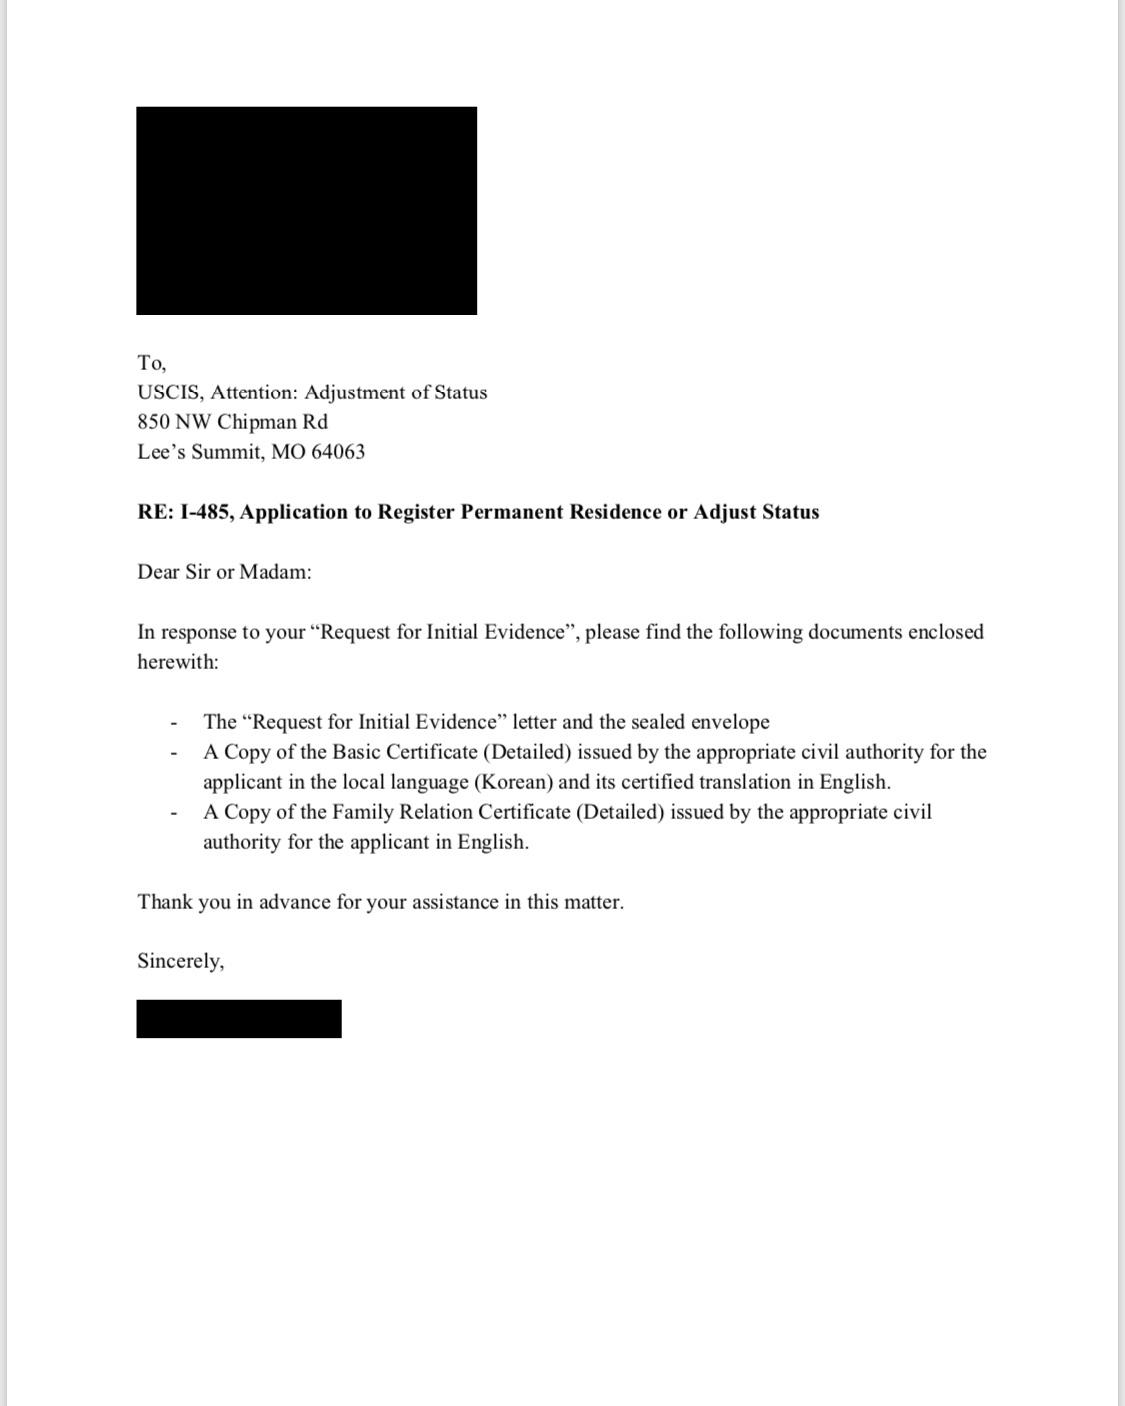 Help Is This Rfe Cover Letter Good Uscis in proportions 1125 X 1406